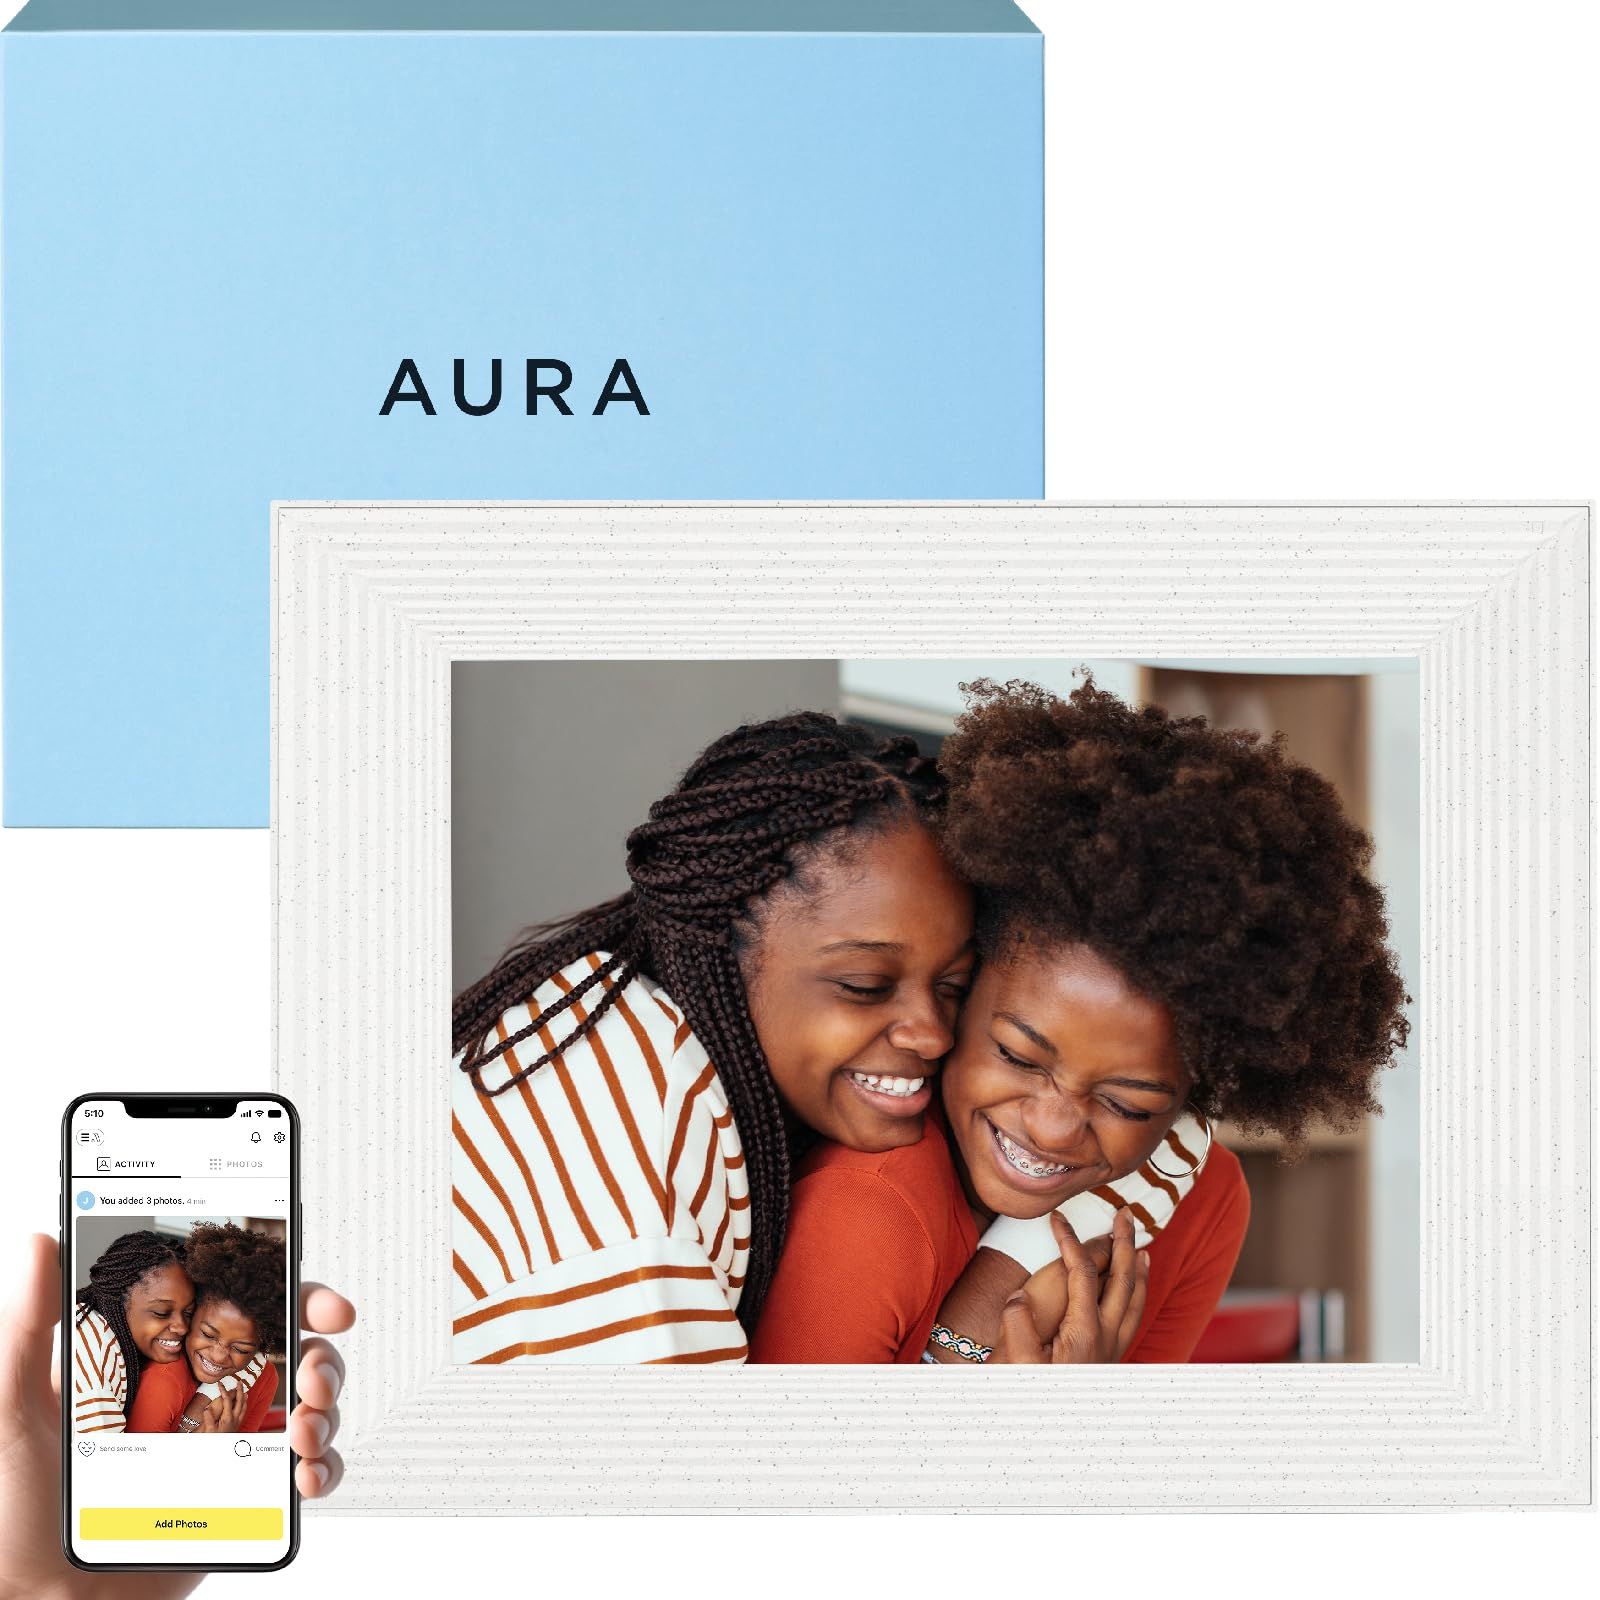 Aura Mason WiFi Digital Picture Frame | The Best Digital Frame for Gifting | Send Photos from Your Phone | Quick, Easy Setup in Aura App | Free Unlimited Storage | White Quartz | Amazon (US)